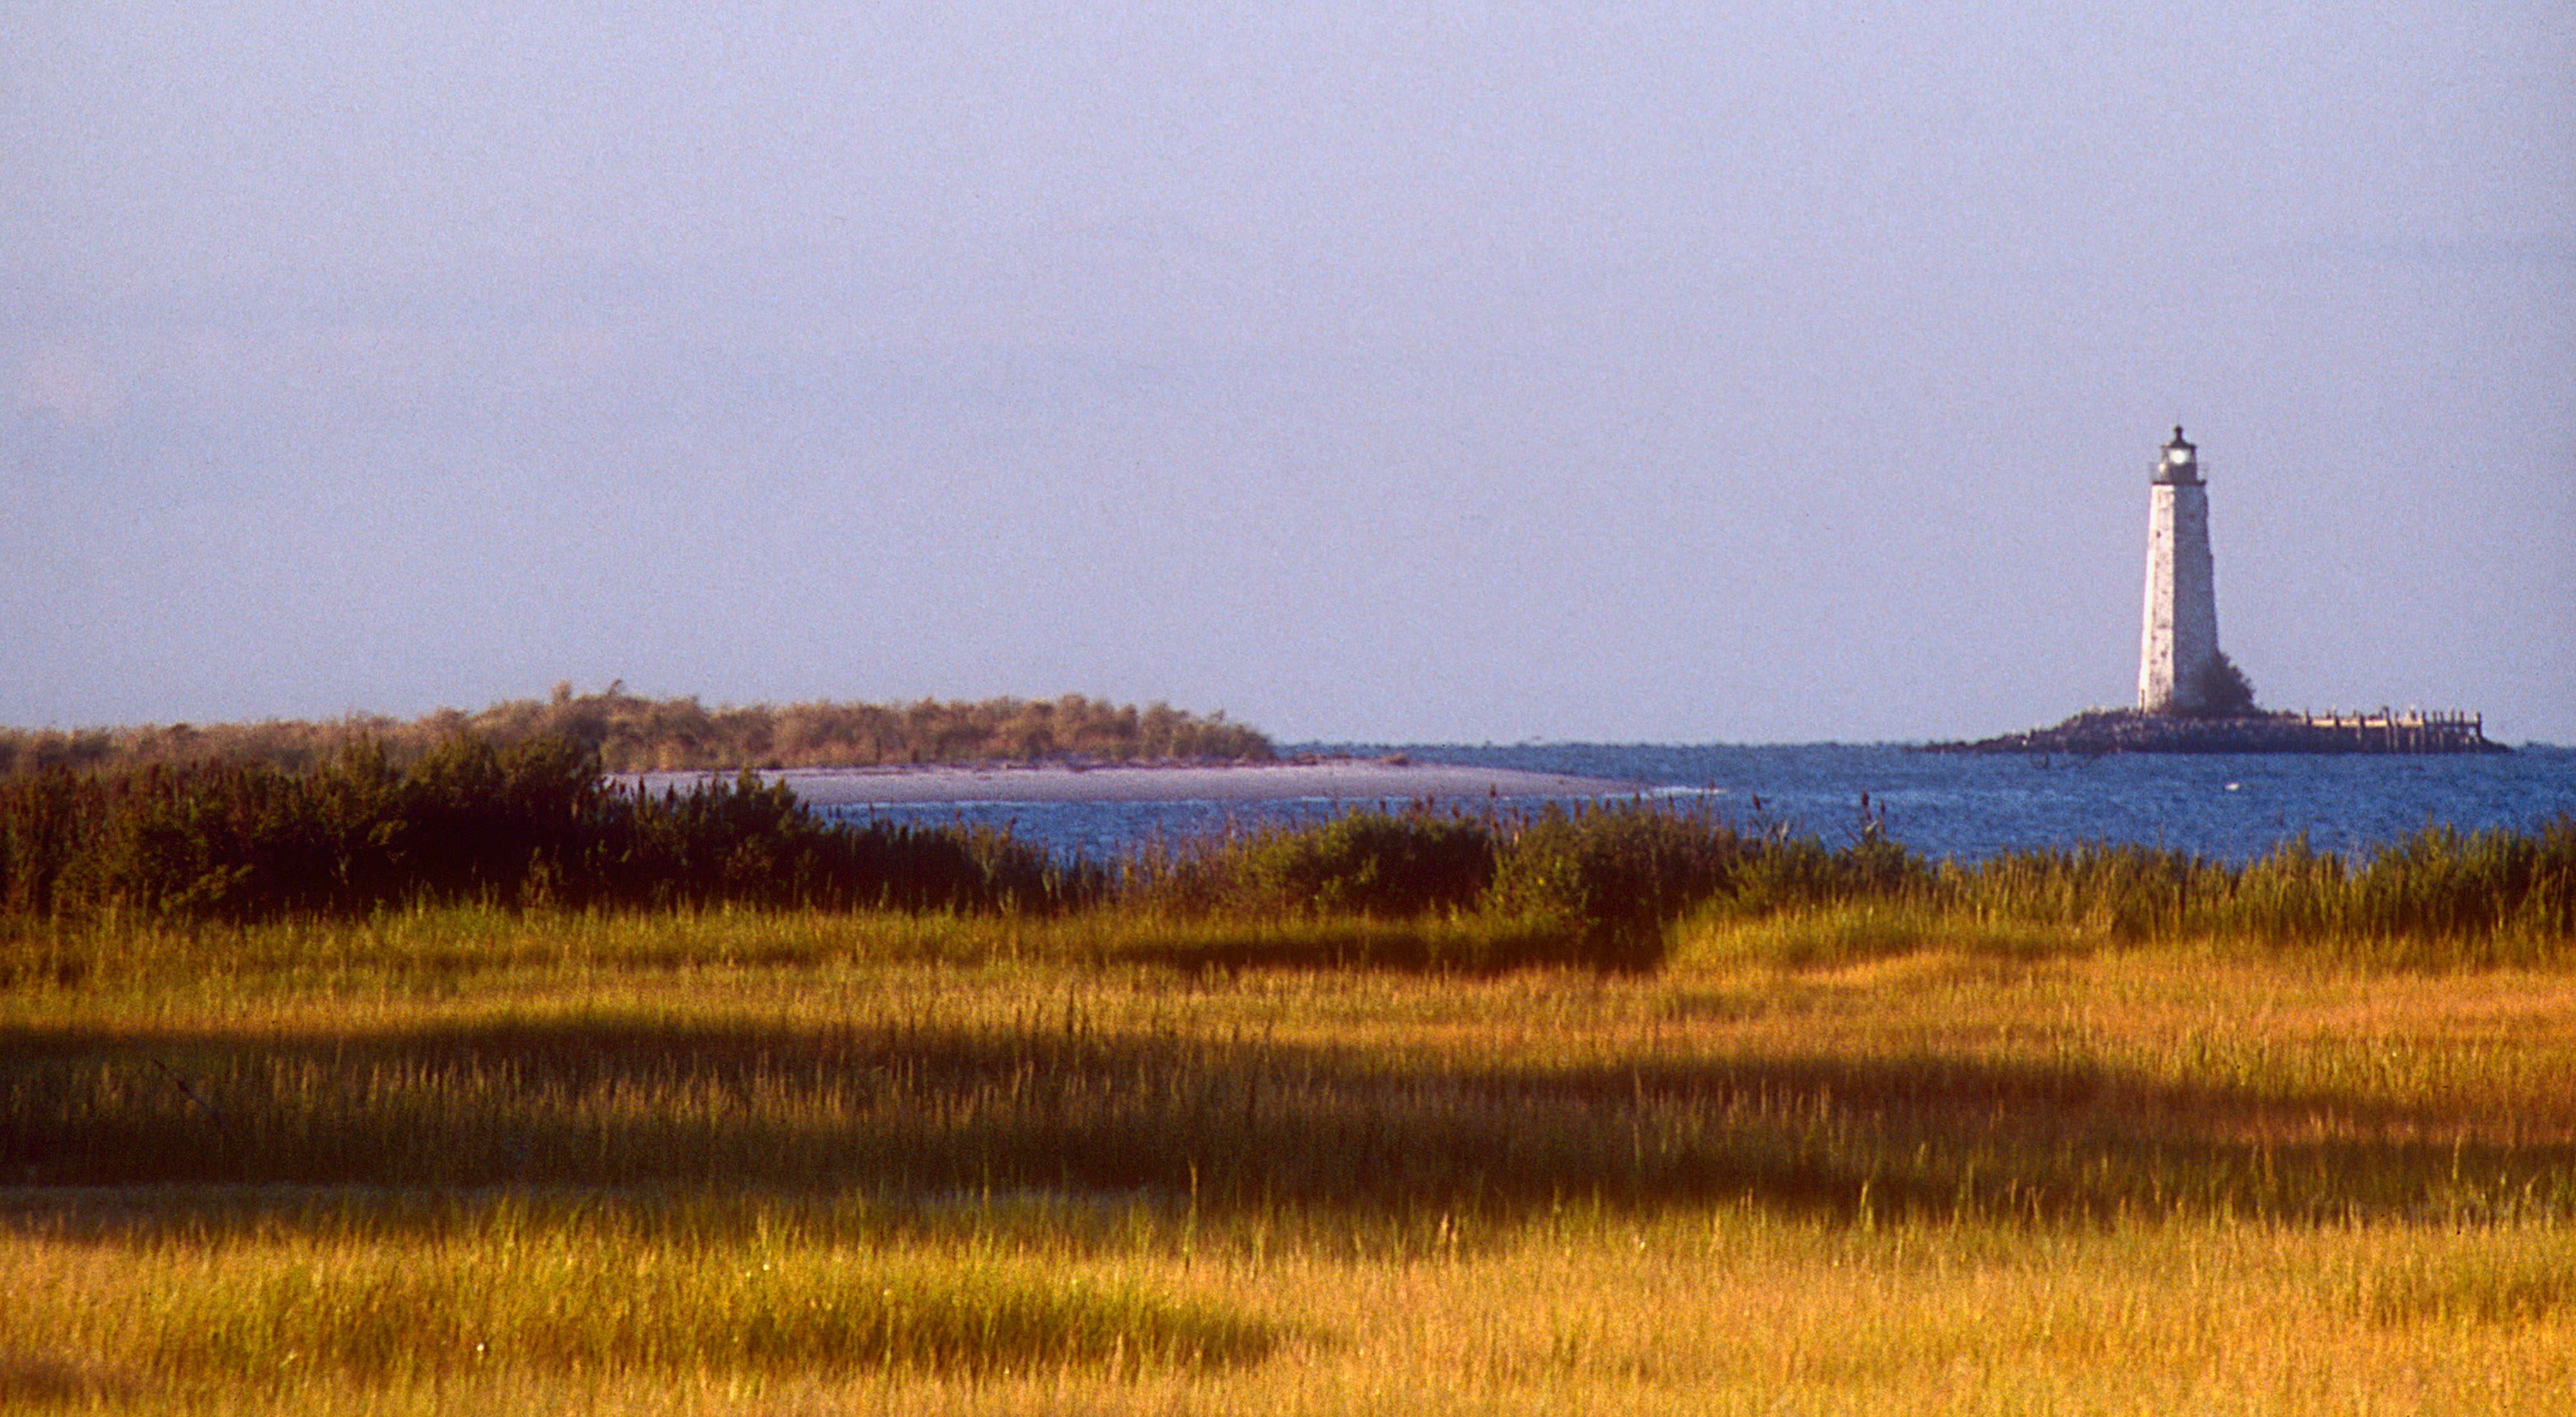 A tall stone lighthouse sits on a small island in the Chesapeake Bay just offshore of a public access area. Tall marsh grasses grow down to the water. A small beach is visible in the middle distance.